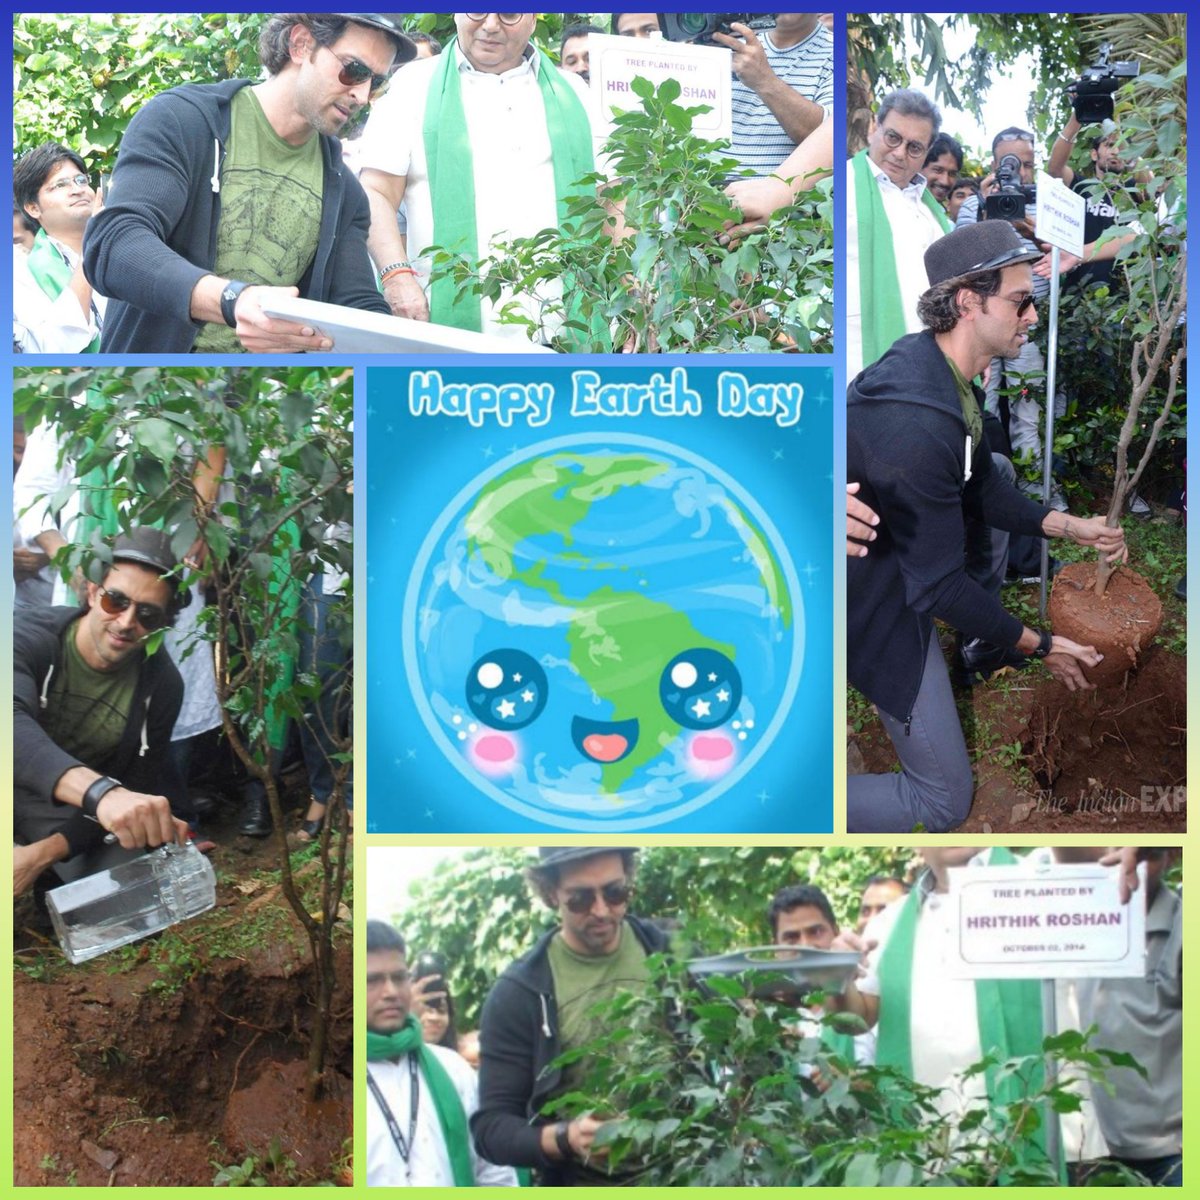 Happy Earth Day🌍🌍 Let's plant a tree and contribute something to the Earth❤️❤️
#HappyEarthDay2021 #PlantTreesSaveEarth #SaveEarth #SaveEarthSaveLife @iHrithik @HrithikRules @HrfcKolkata #HrithikRoshan